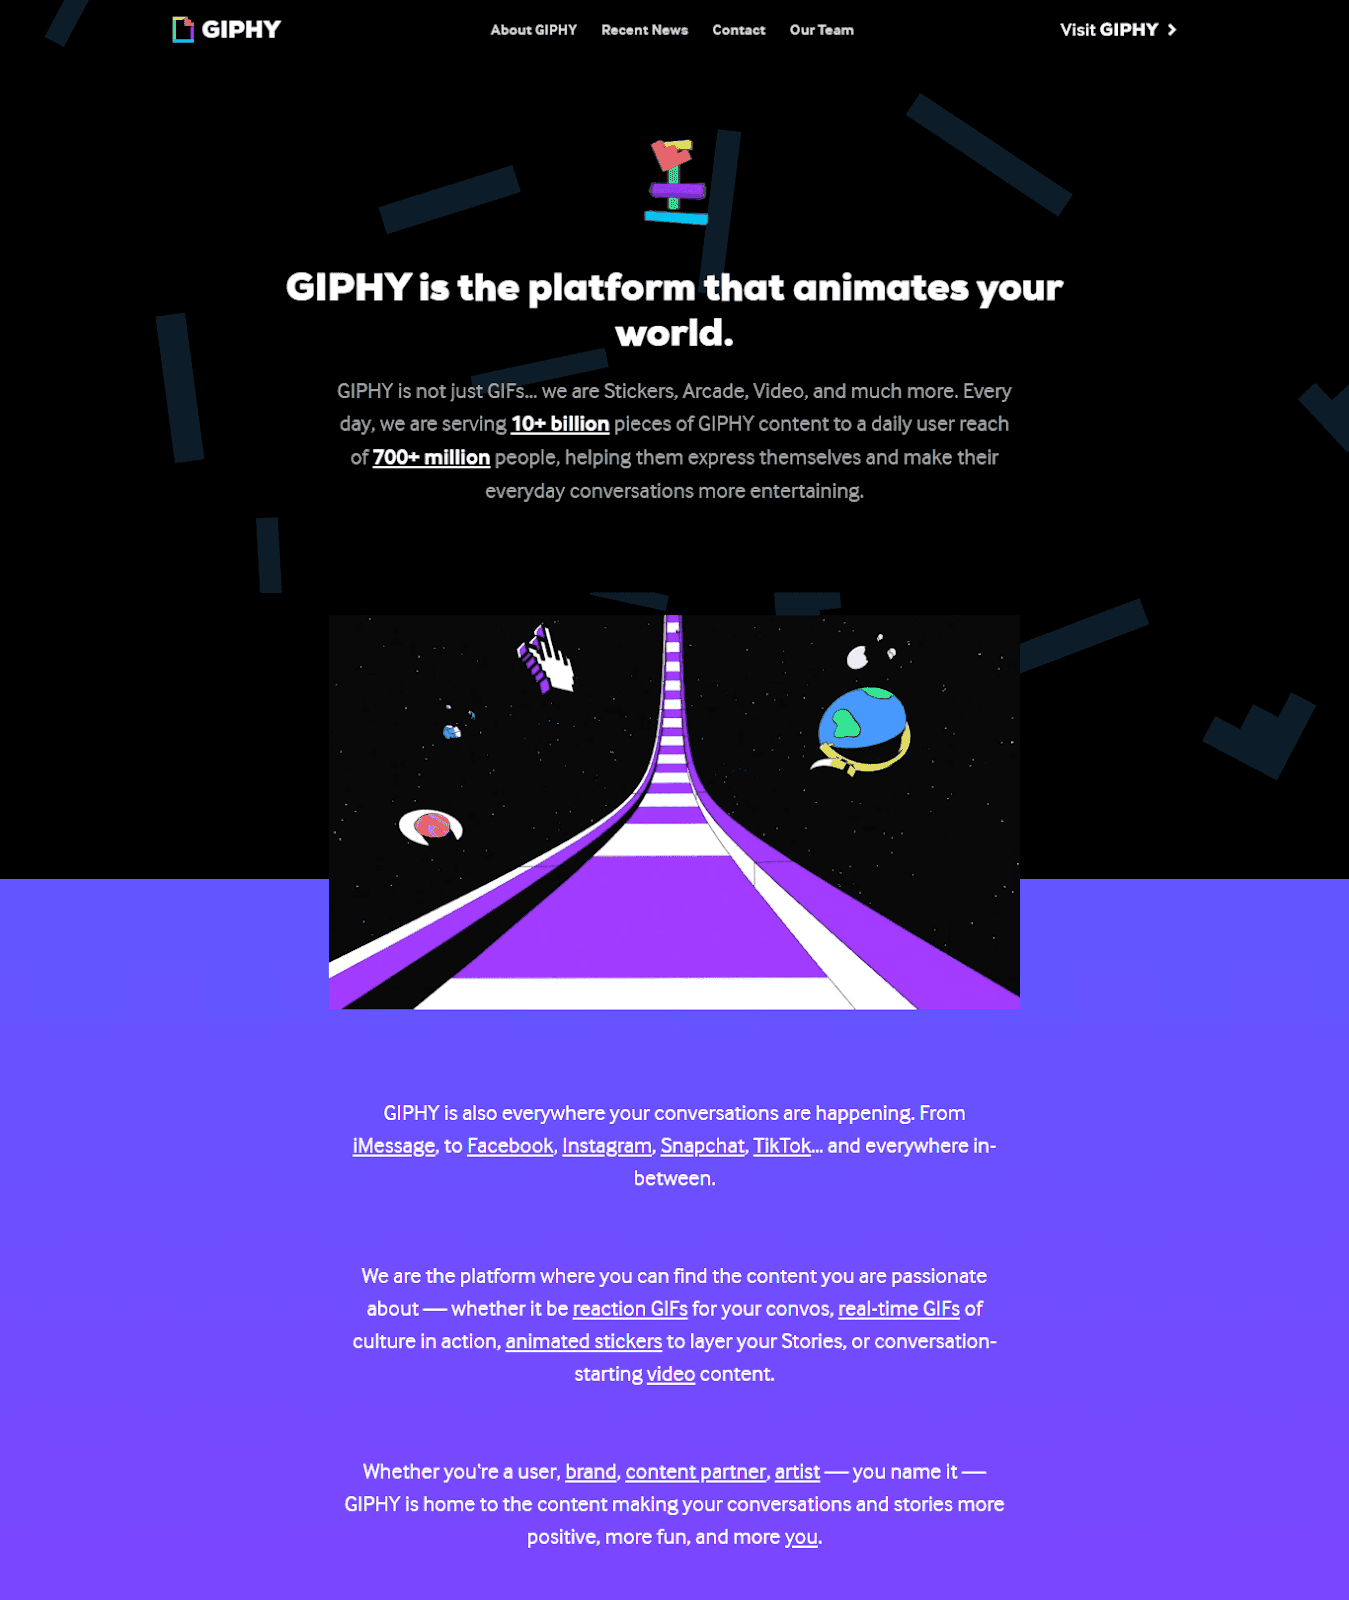 Giphy about us page